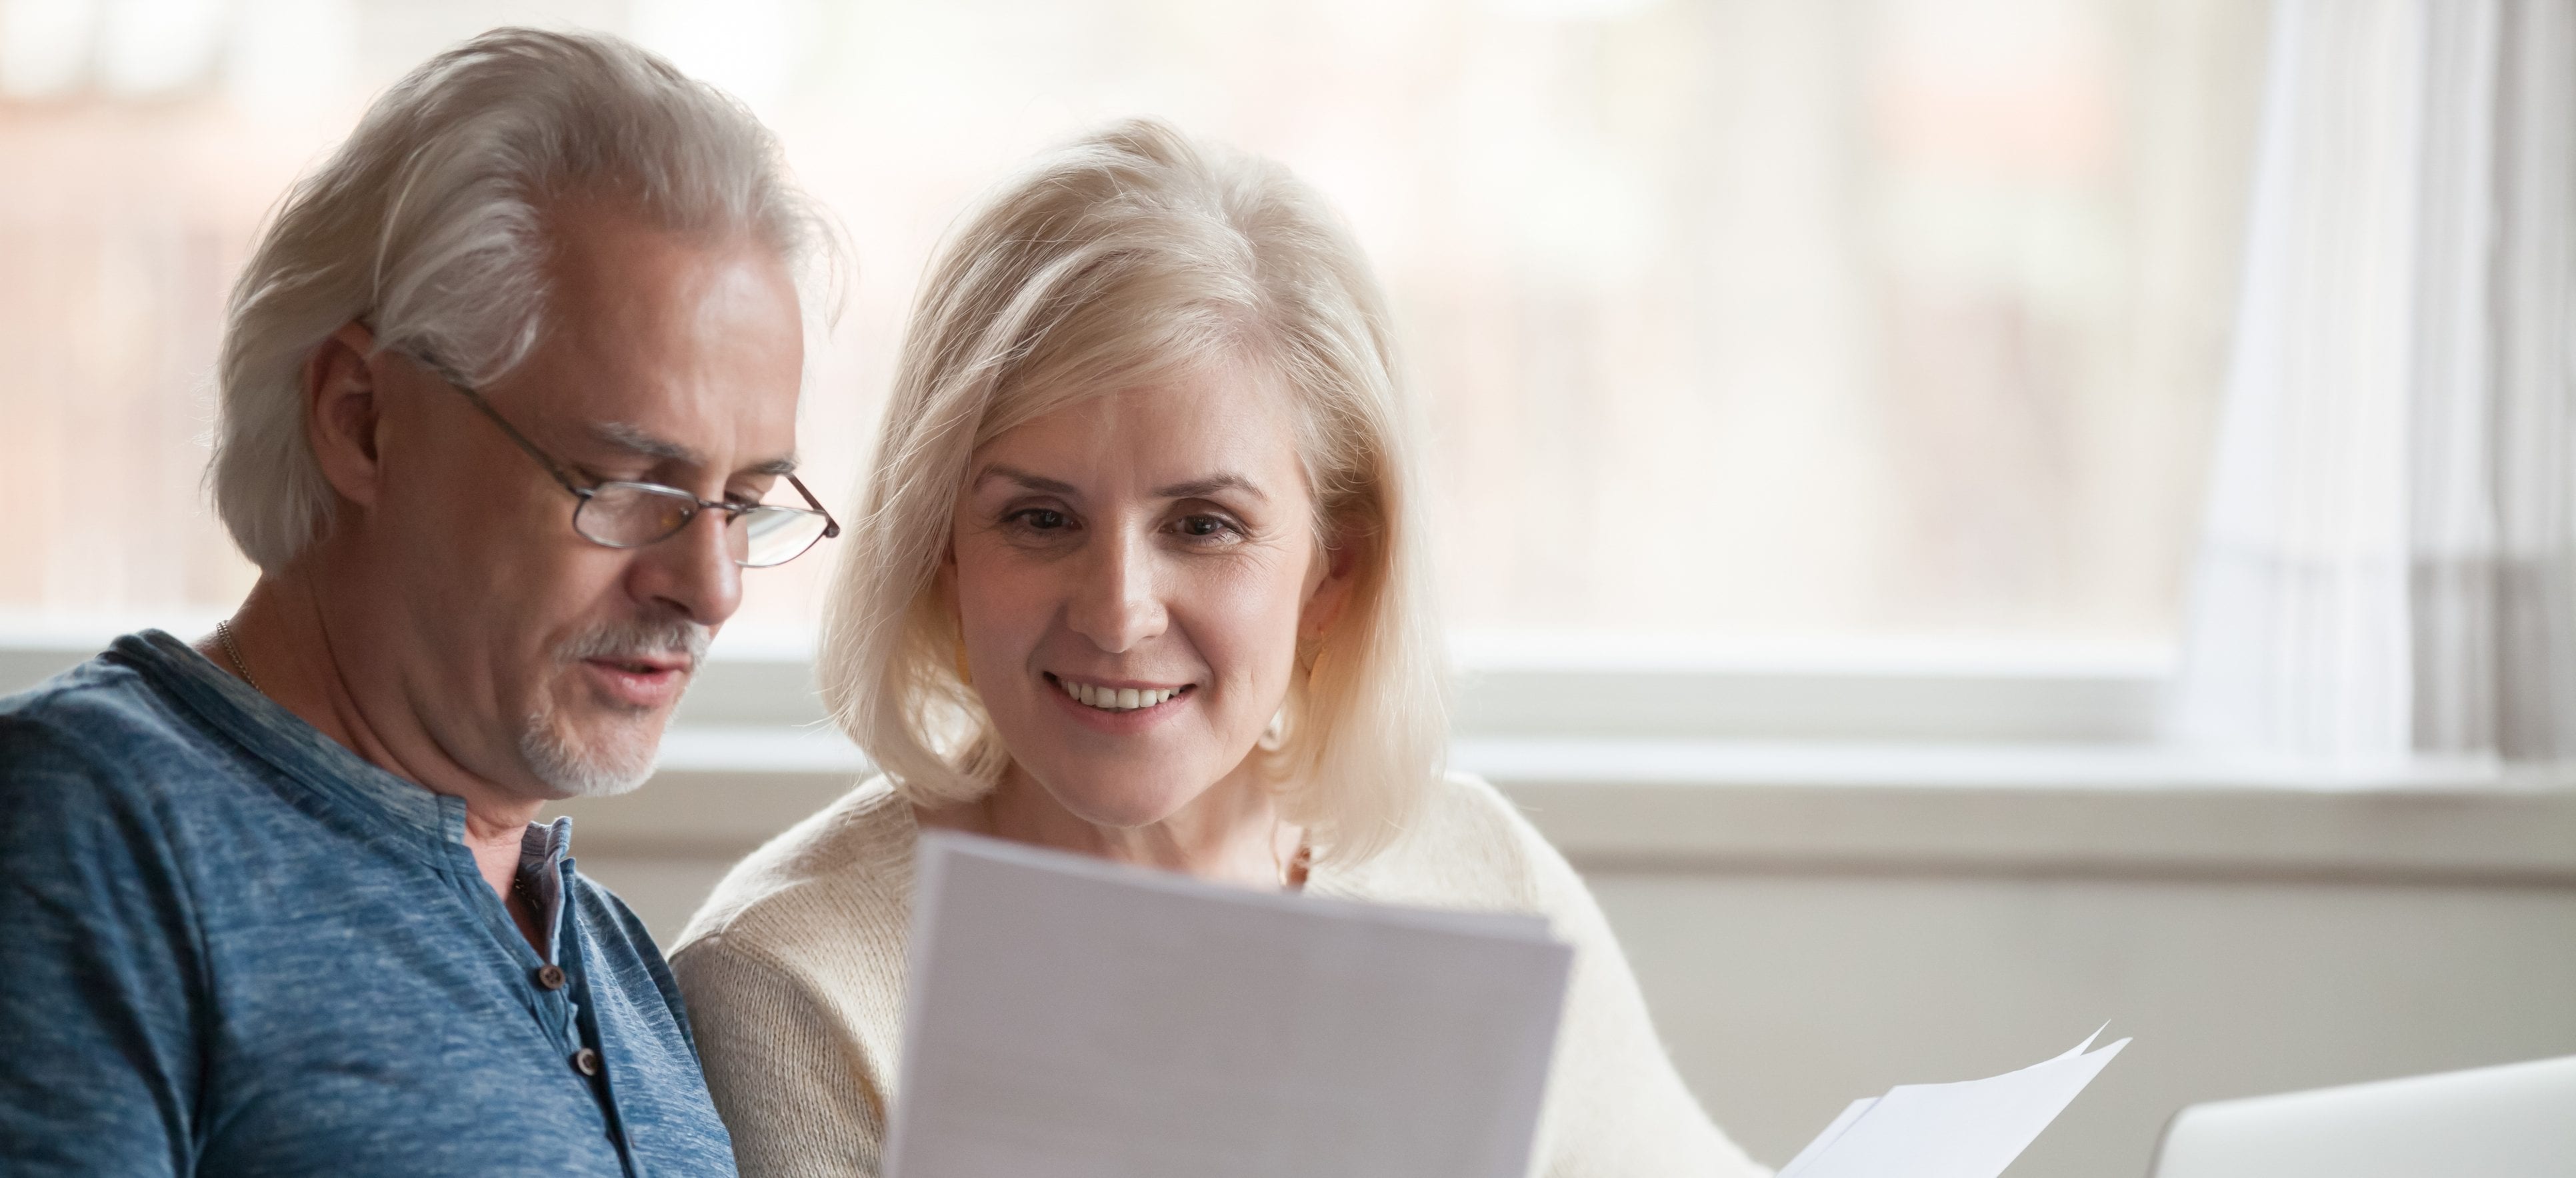 Happy old middle aged couple holding reading good news in document, smiling senior mature family excited by mail letter, checking paying domestic bills online on laptop, discussing budget planning